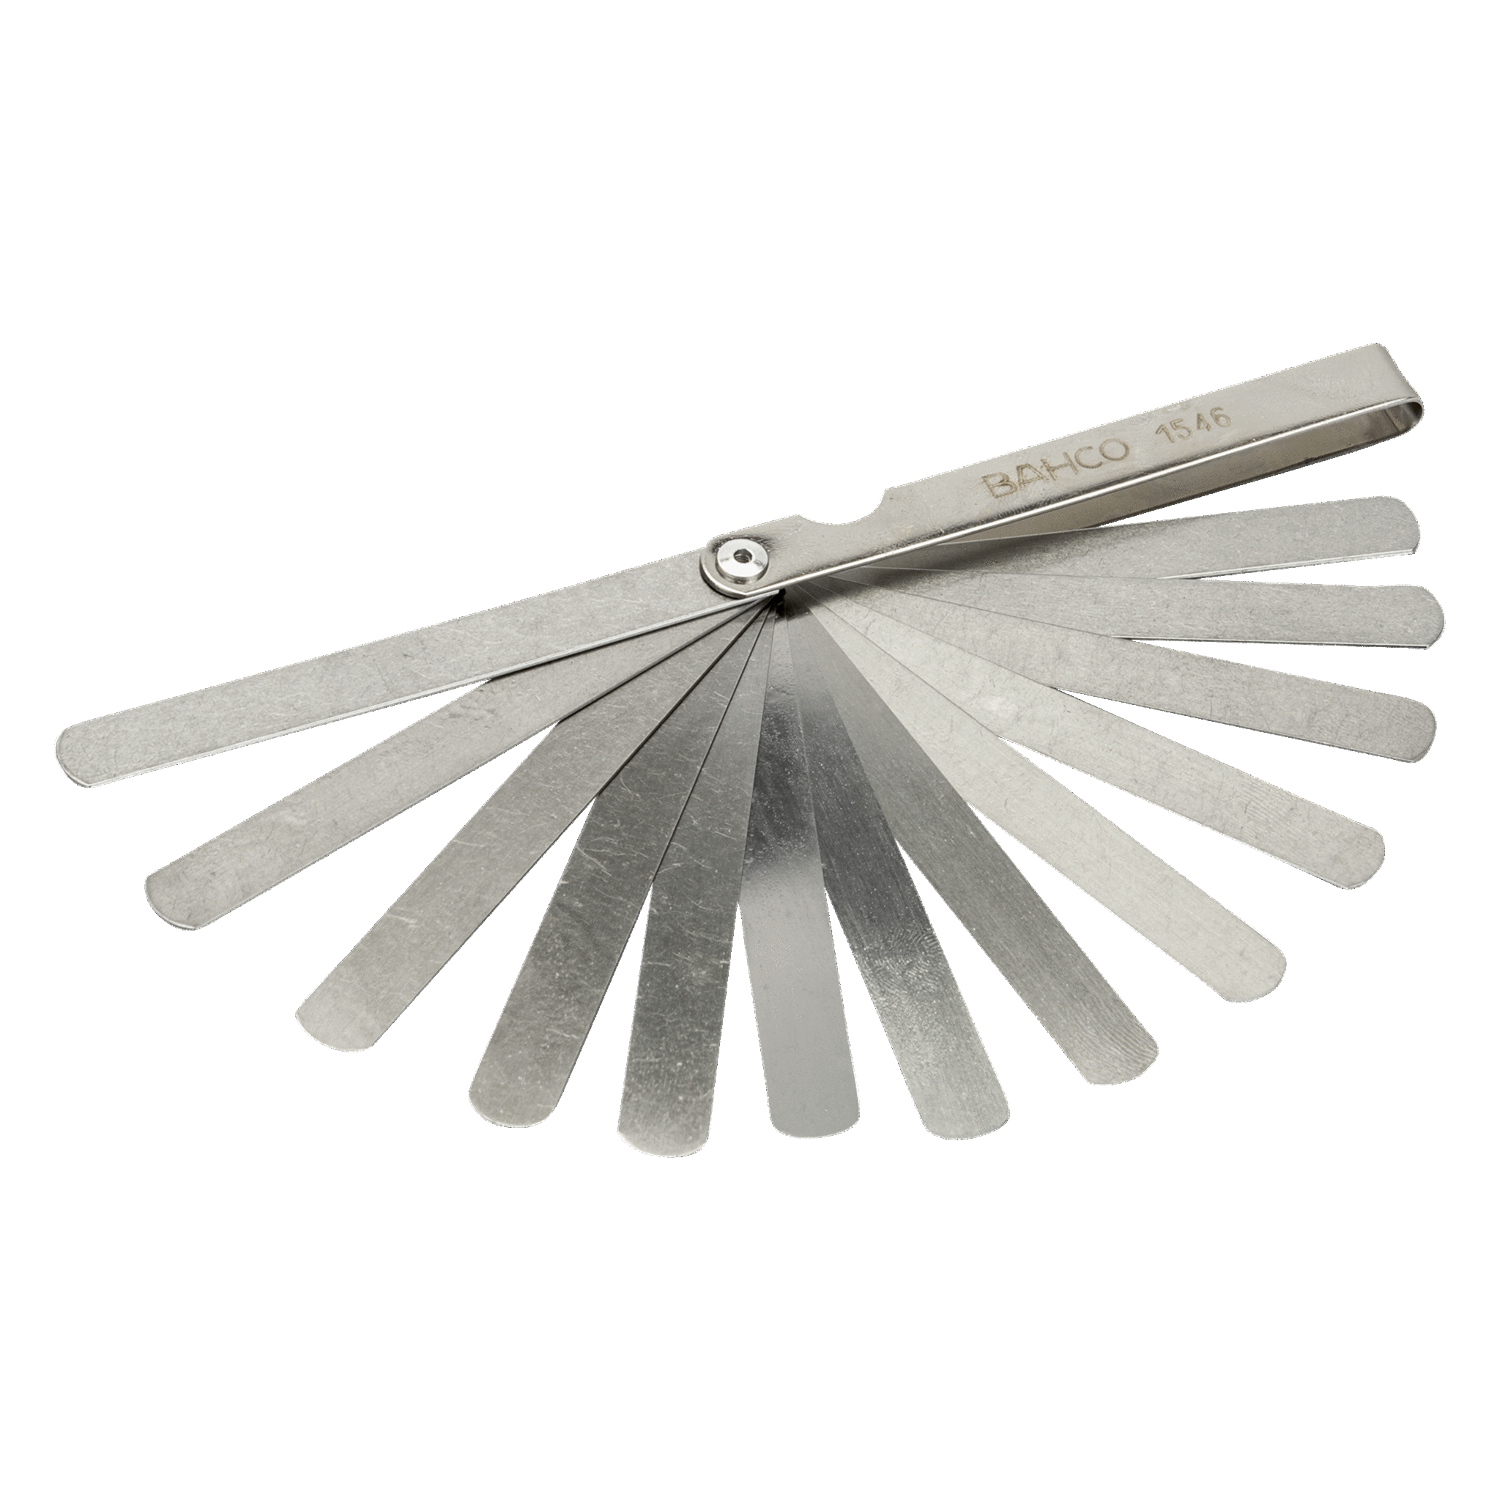 BAHCO 1546 Professional Feeler Gauge with 13 Blades (BAHCO Tools) - Premium Feeler Gauge from BAHCO - Shop now at Yew Aik.